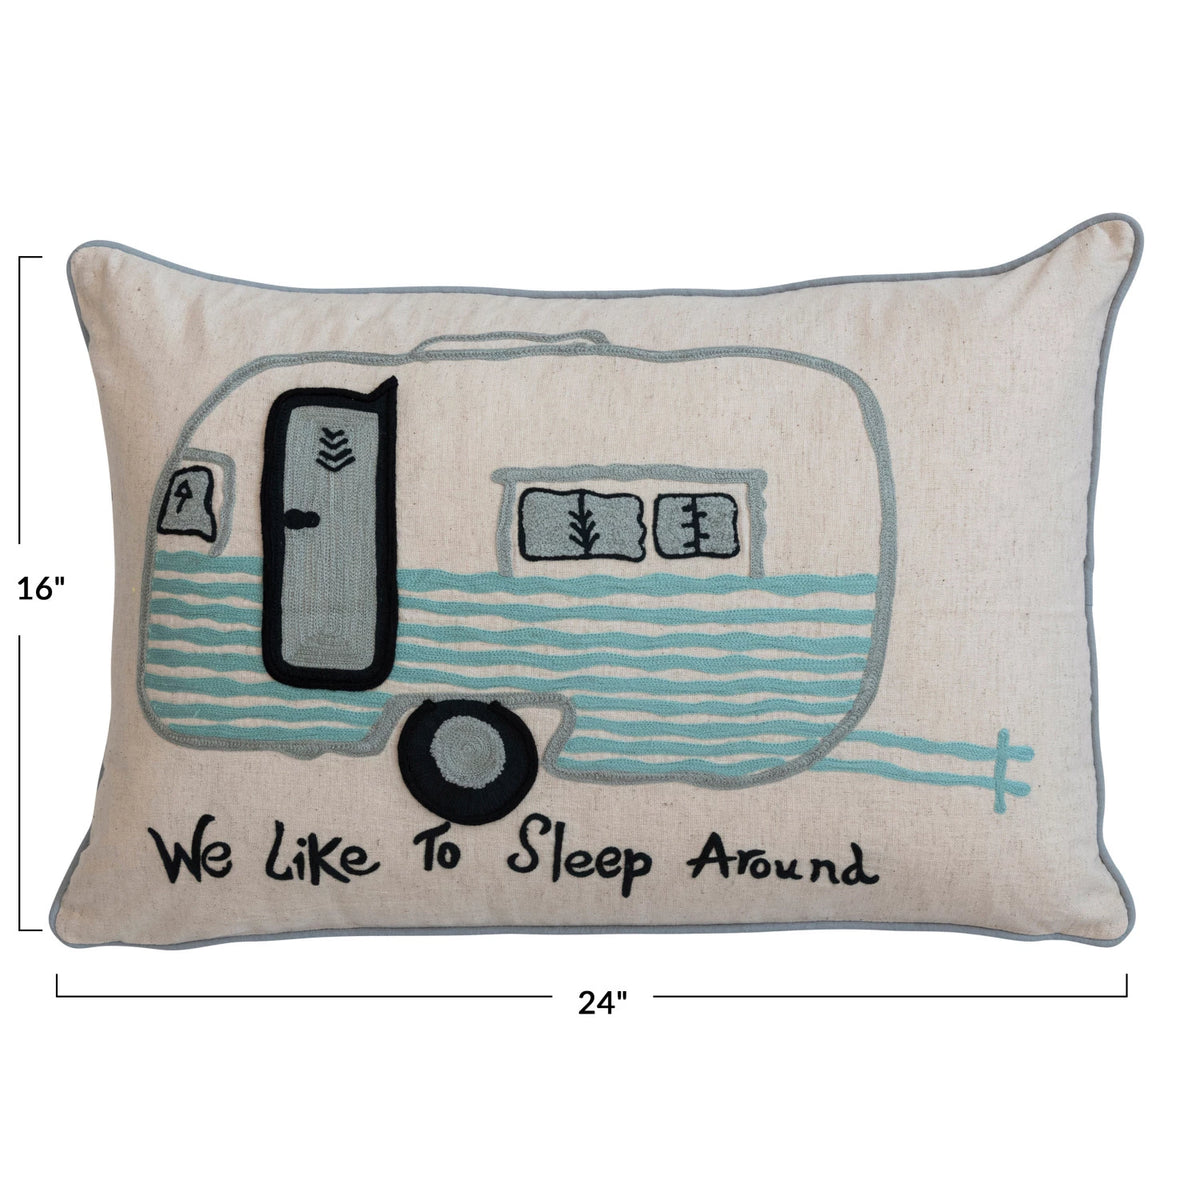 Embroidered Camper Pillow - We Like To Sleep Around